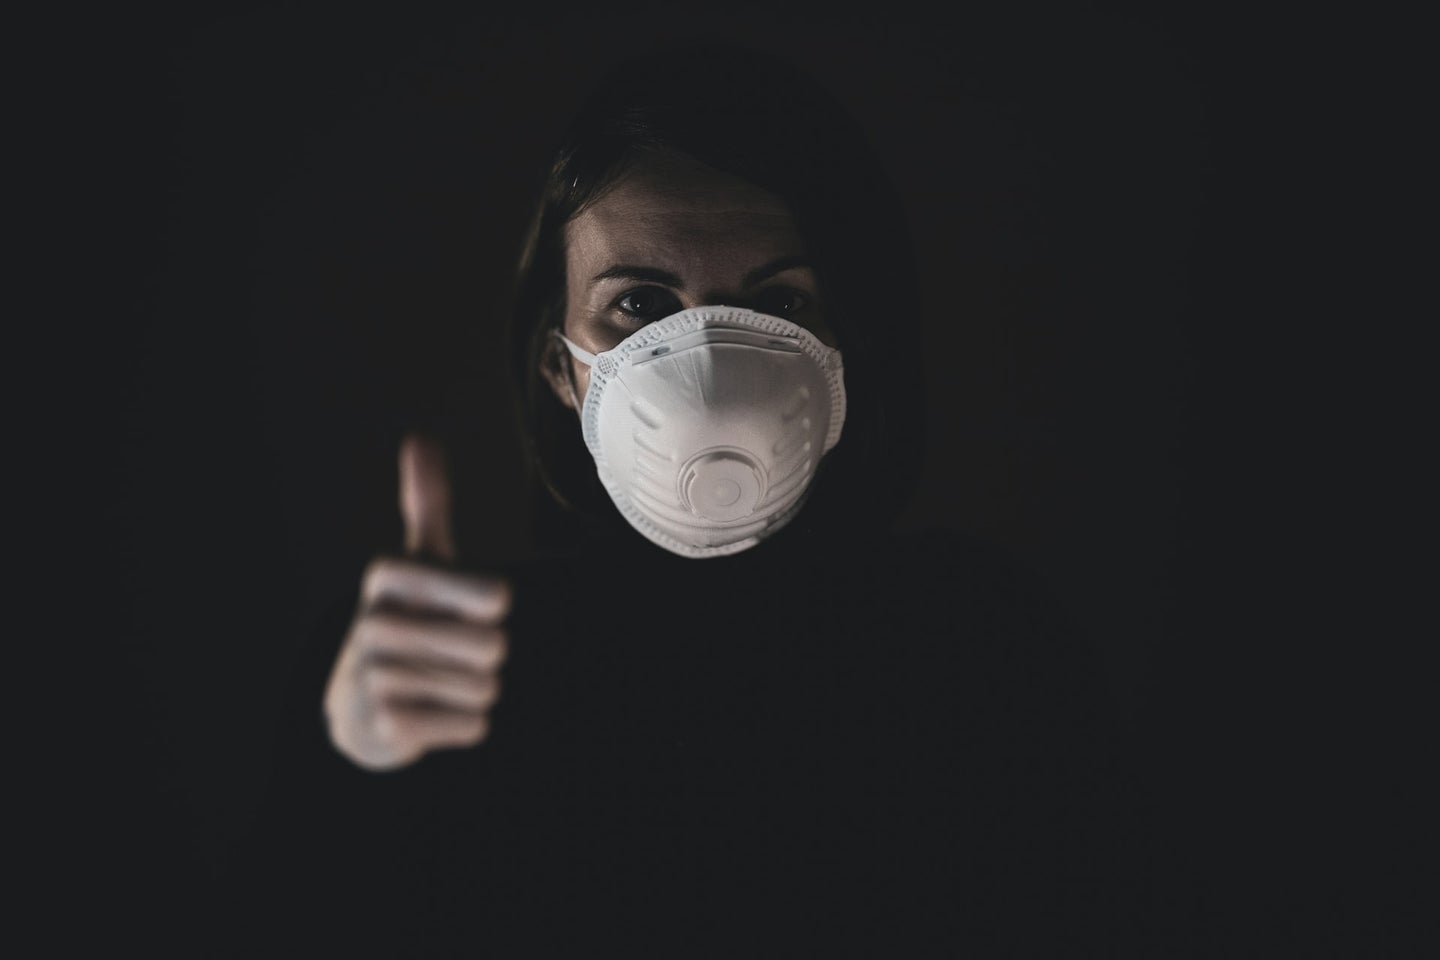 A person wearing an N95 mask and making a thumbs up